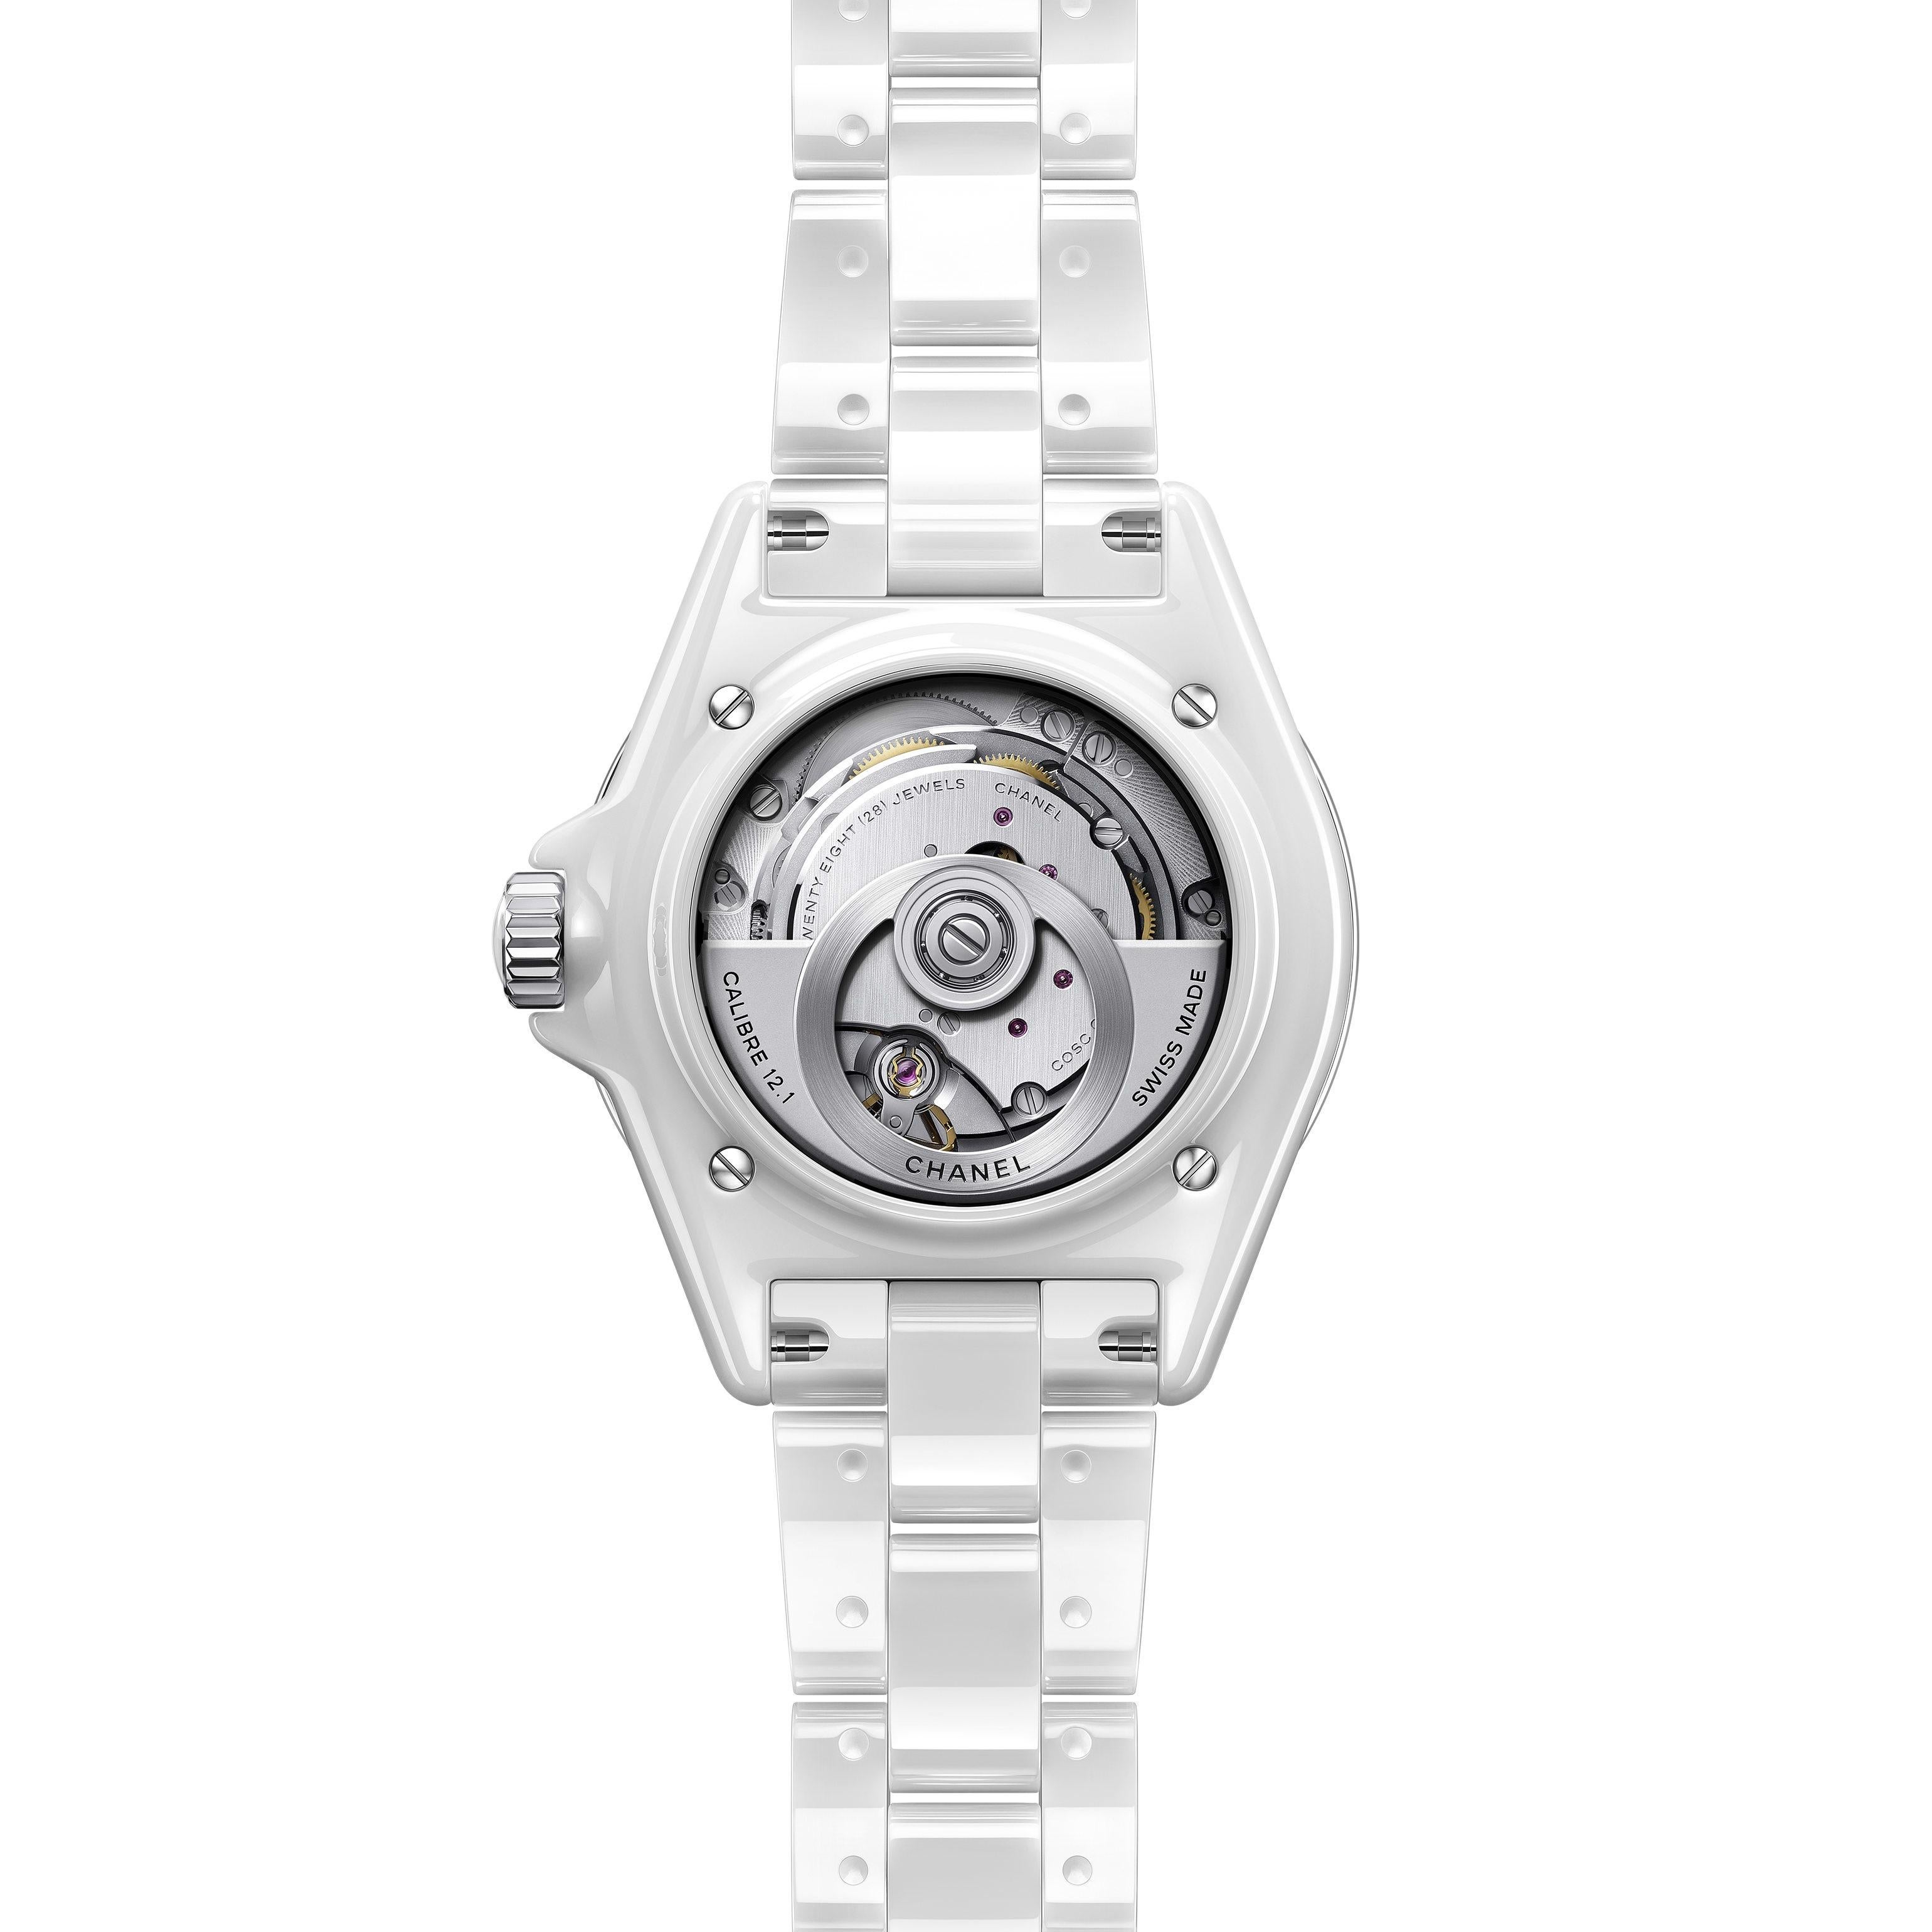 White ceramic case with a white ceramic bracelet. Uni-directional rotating white ceramic bezel. White dial with black hands and Arabic numeral hour markers. Minute markers around the outer rim. Dial Type: Analog. Luminescent hands and markers. Date